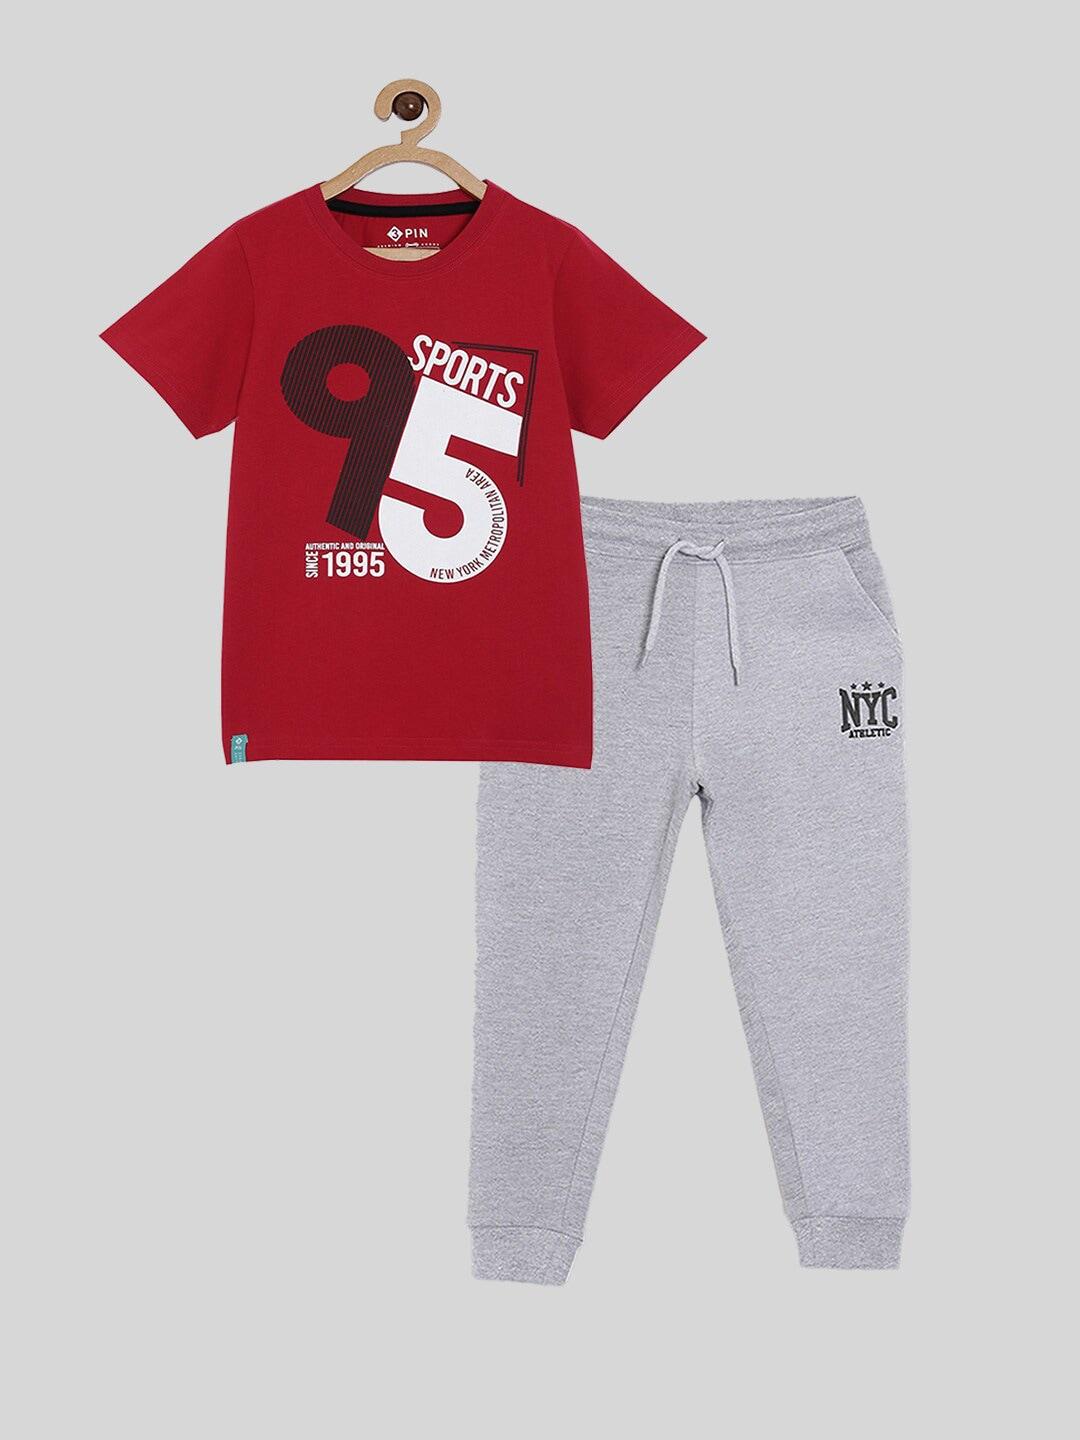 3PIN Boys Maroon & Grey Printed Pure Cotton T-shirt with Joggers